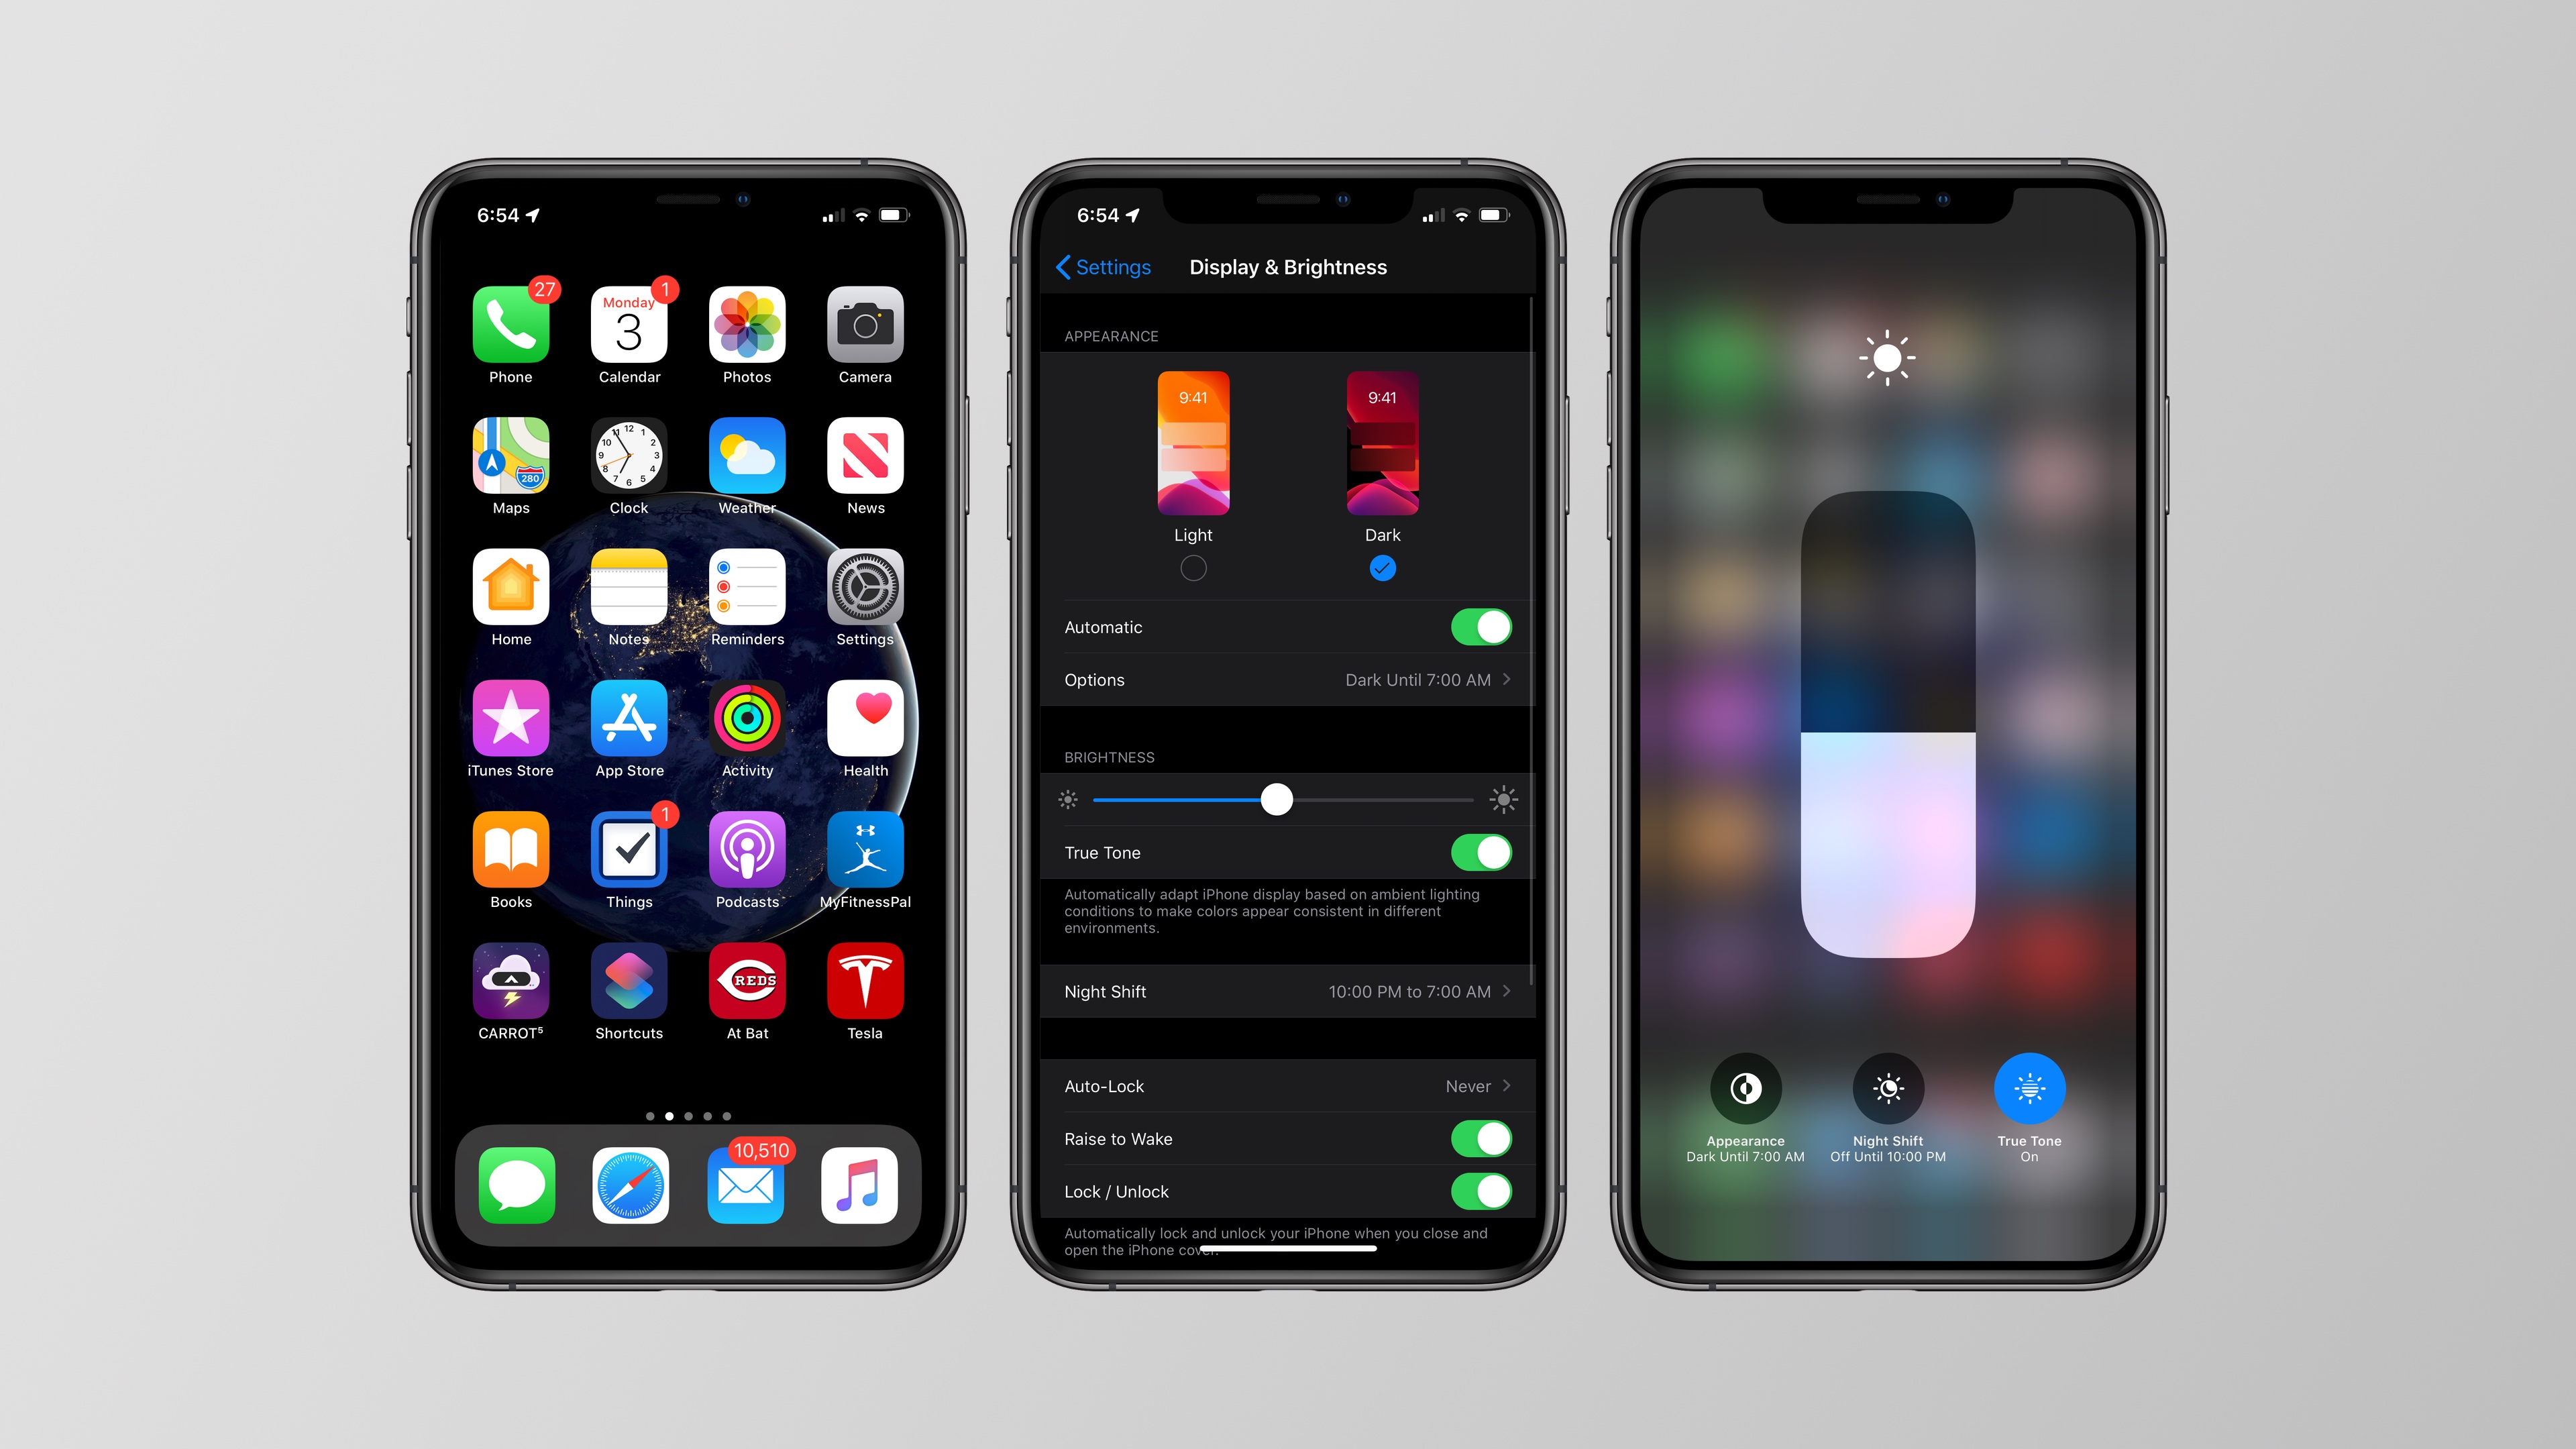 What's new in iOS 13 beta 2? Files 